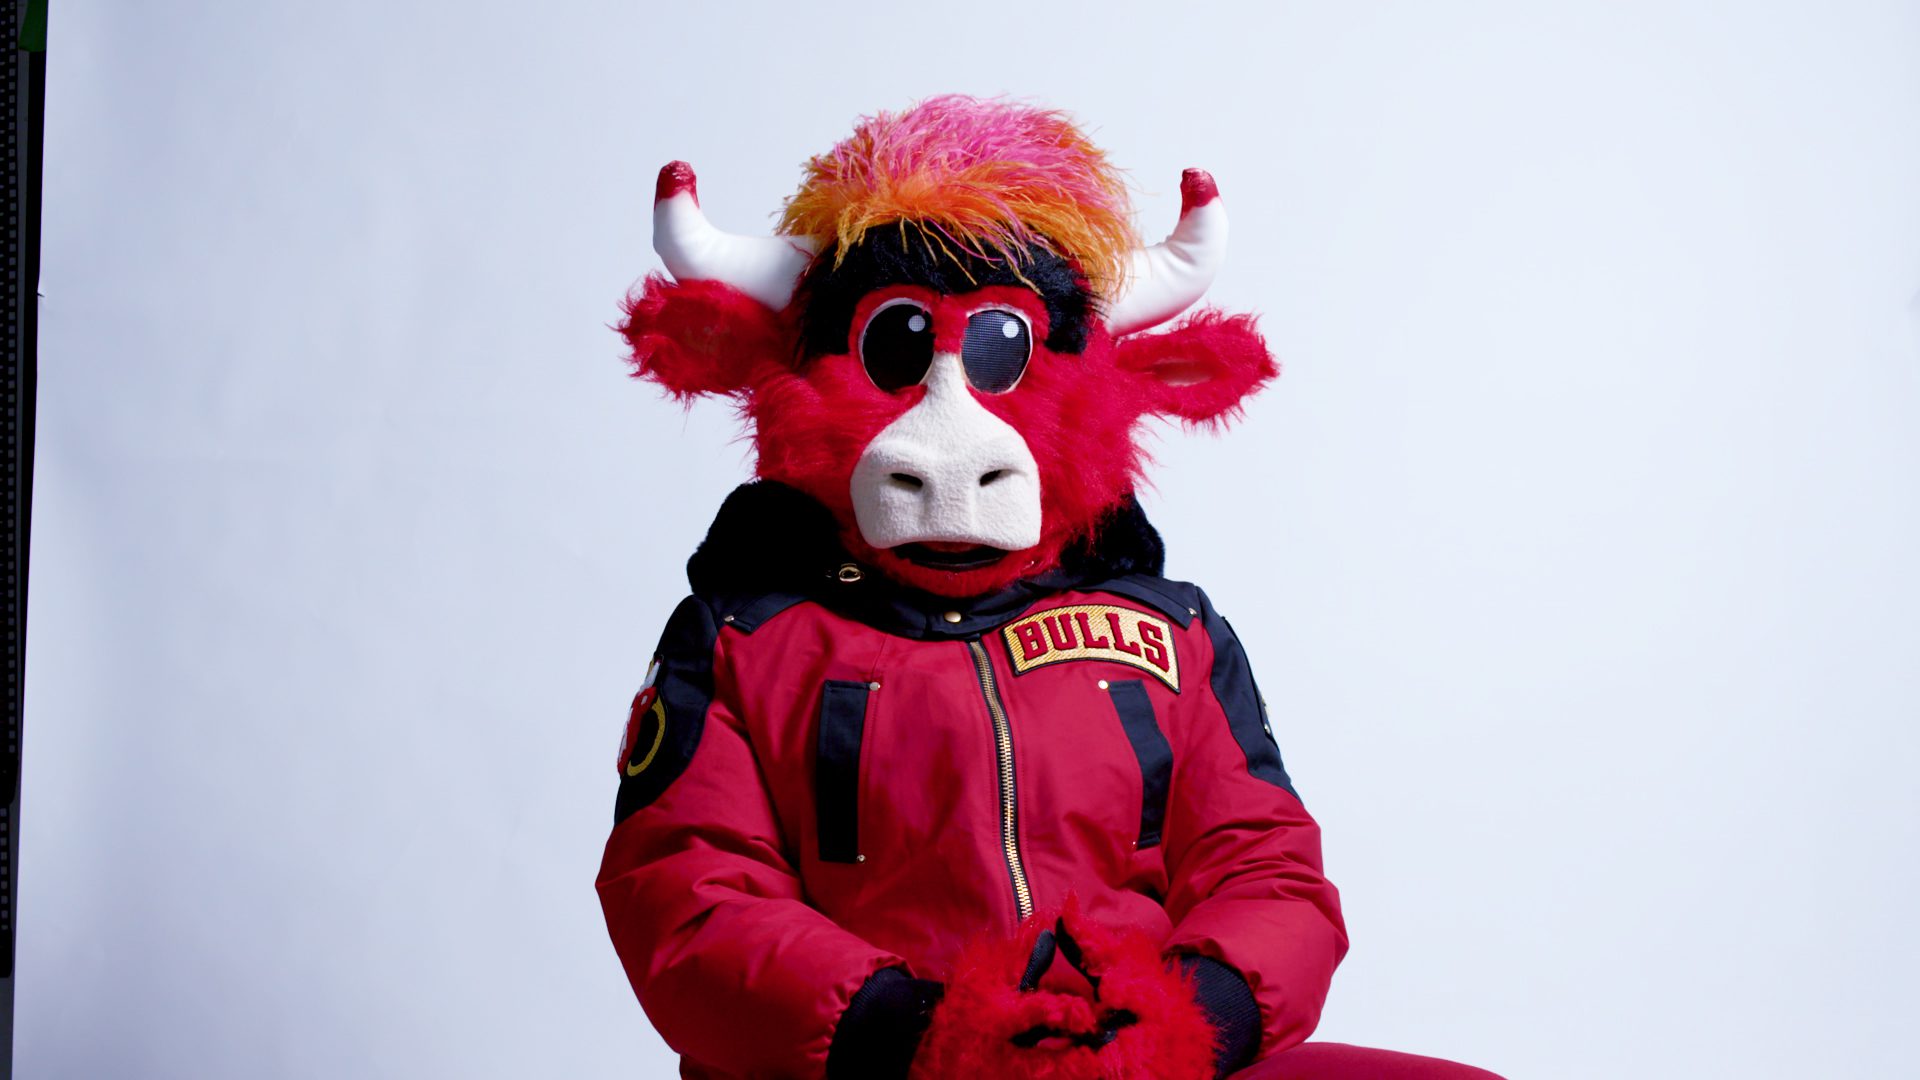 My new Benny the Bull MASCOT gave me SuperPowers !! 